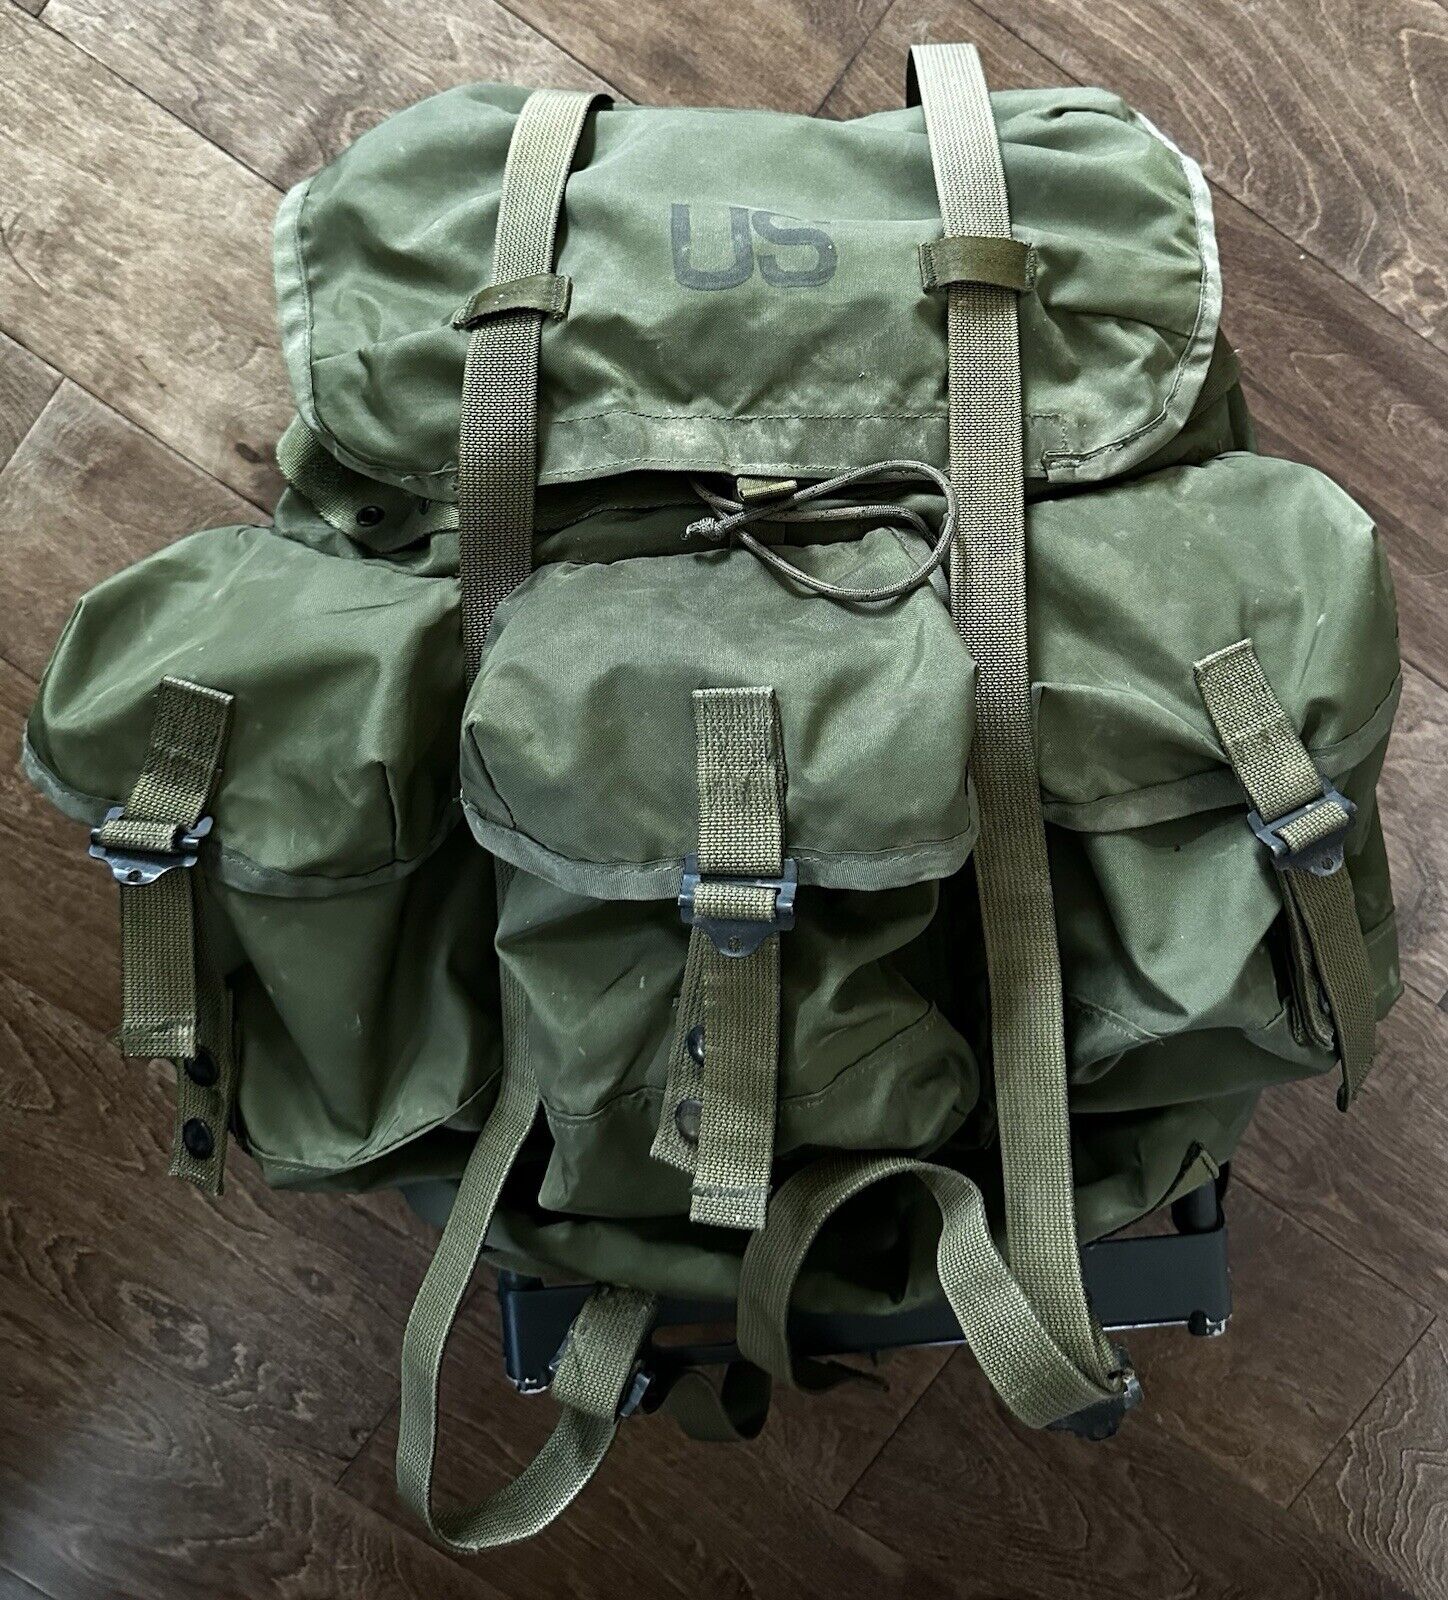 70s US GI Army Military Field Pack Combat Nylon Medium Green LC-1 With Frame